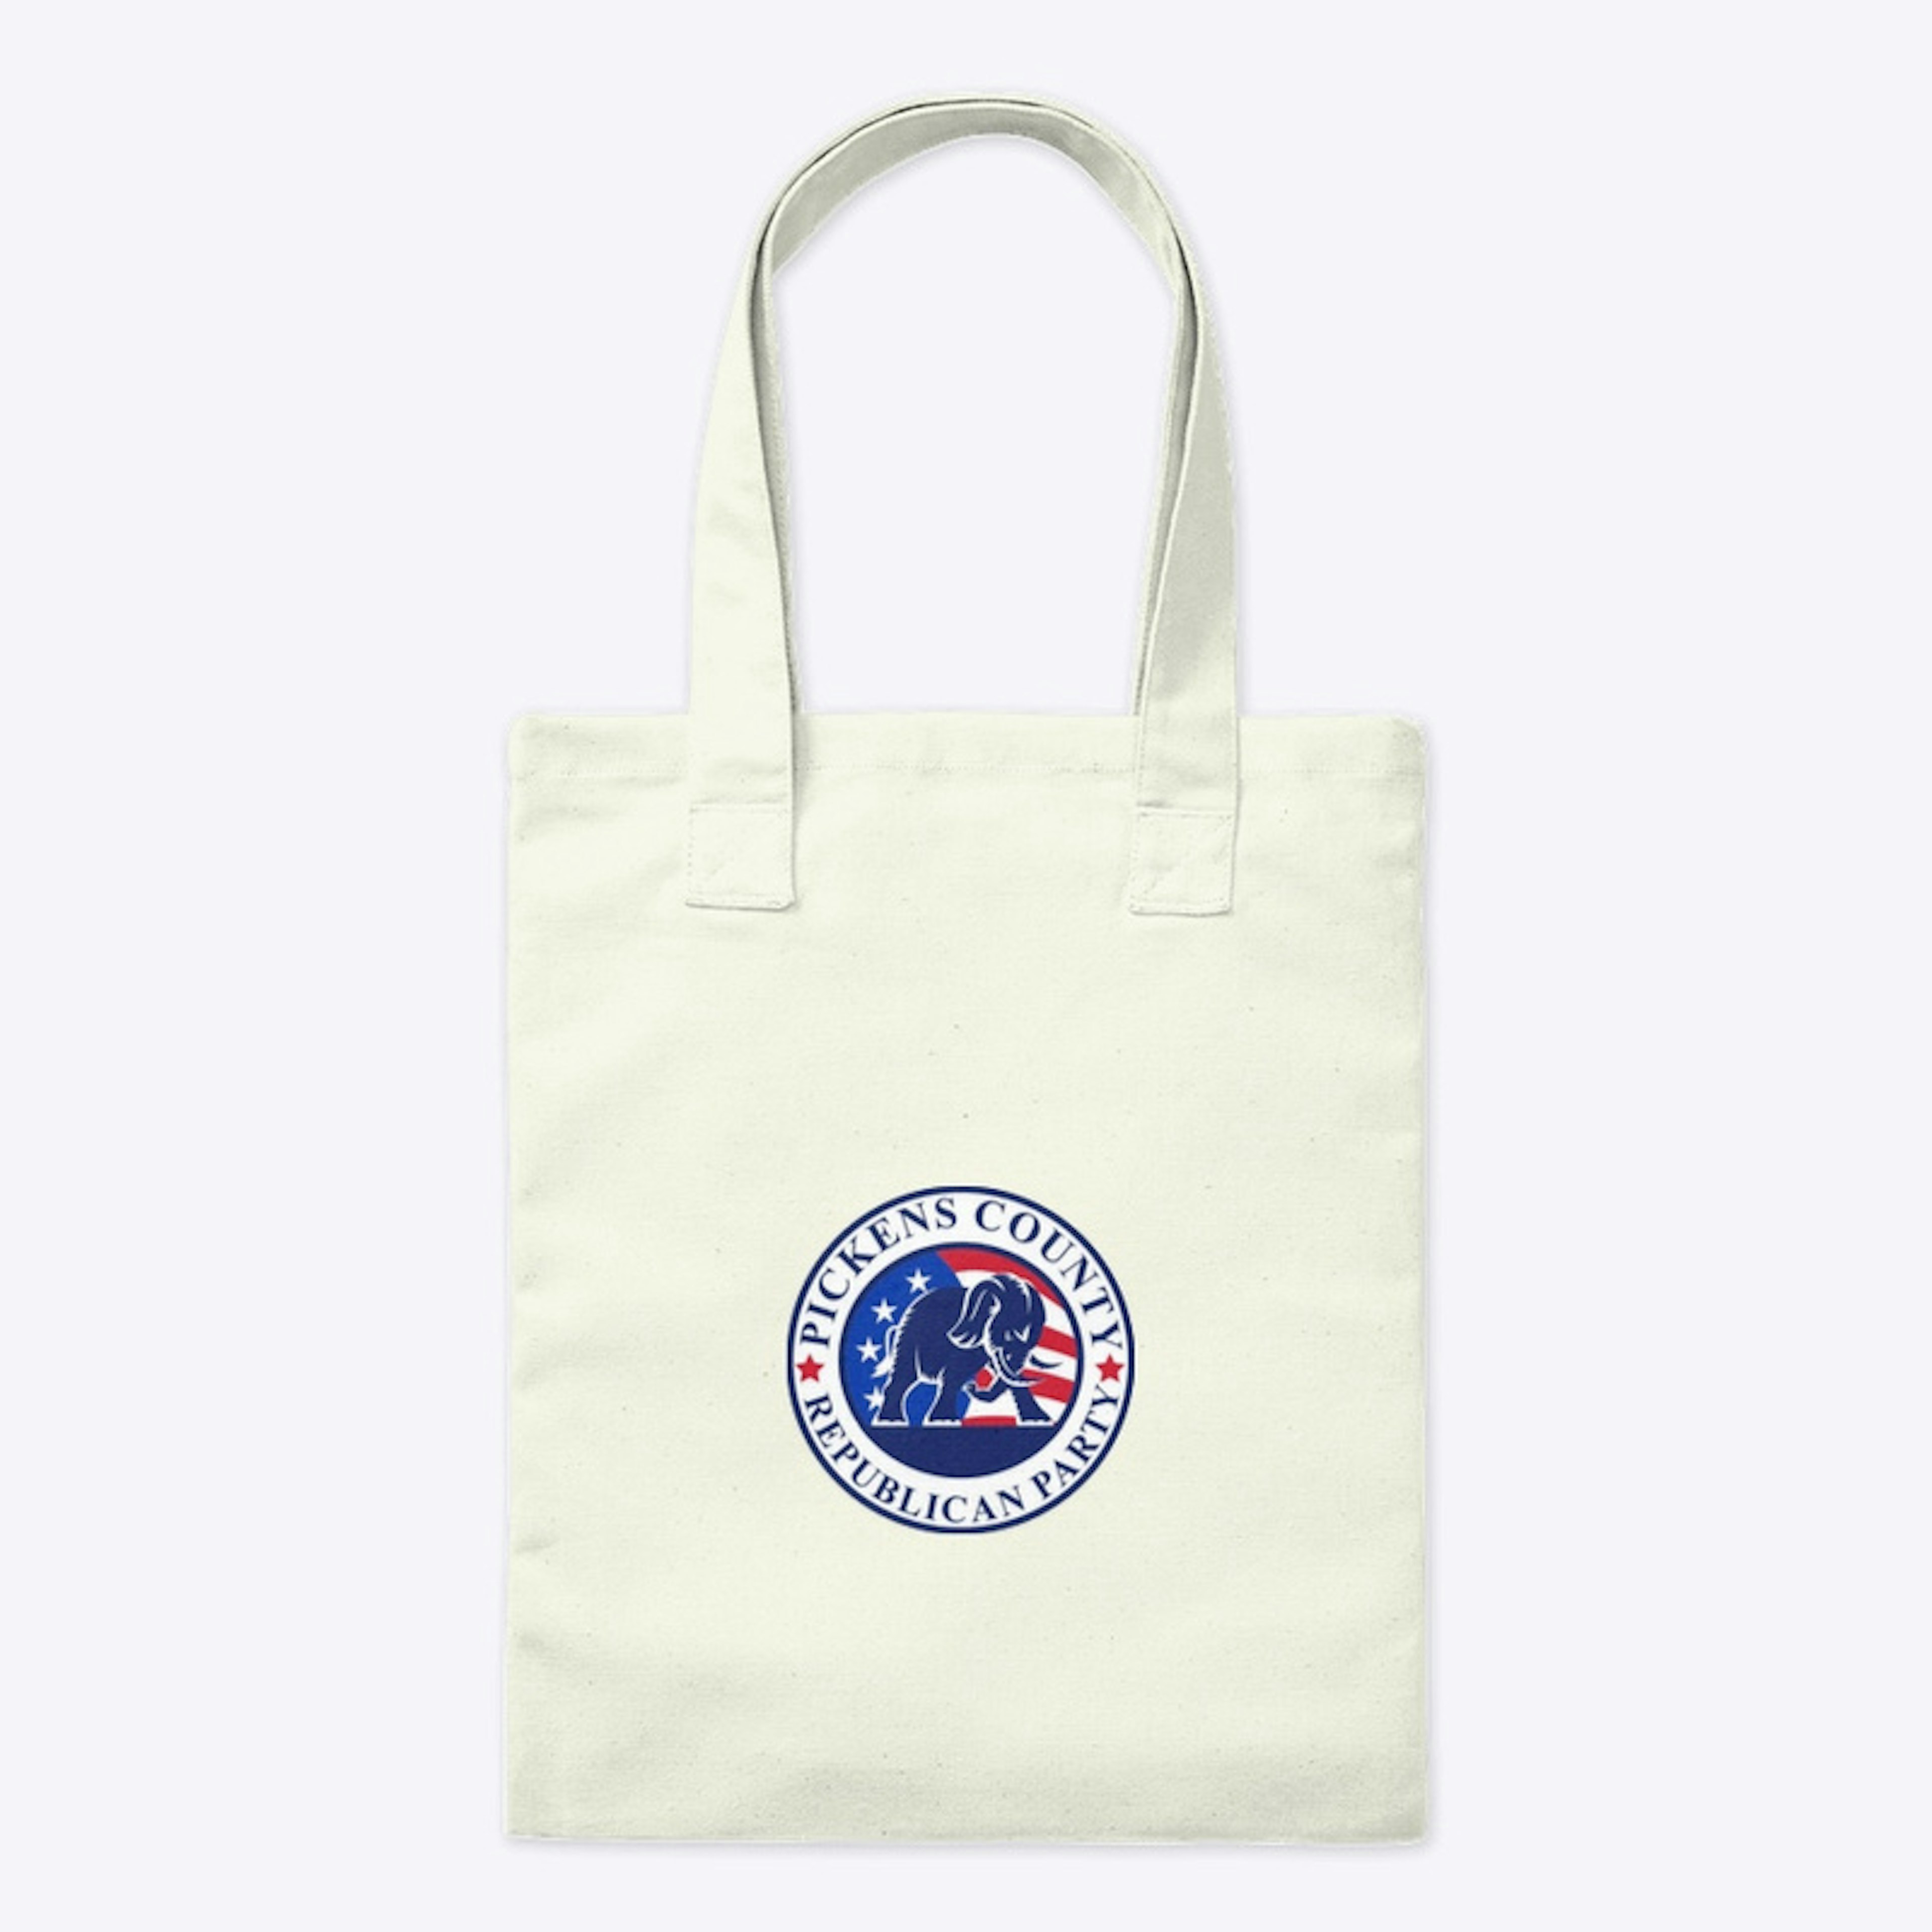 Pickens County GOP Tote Bag